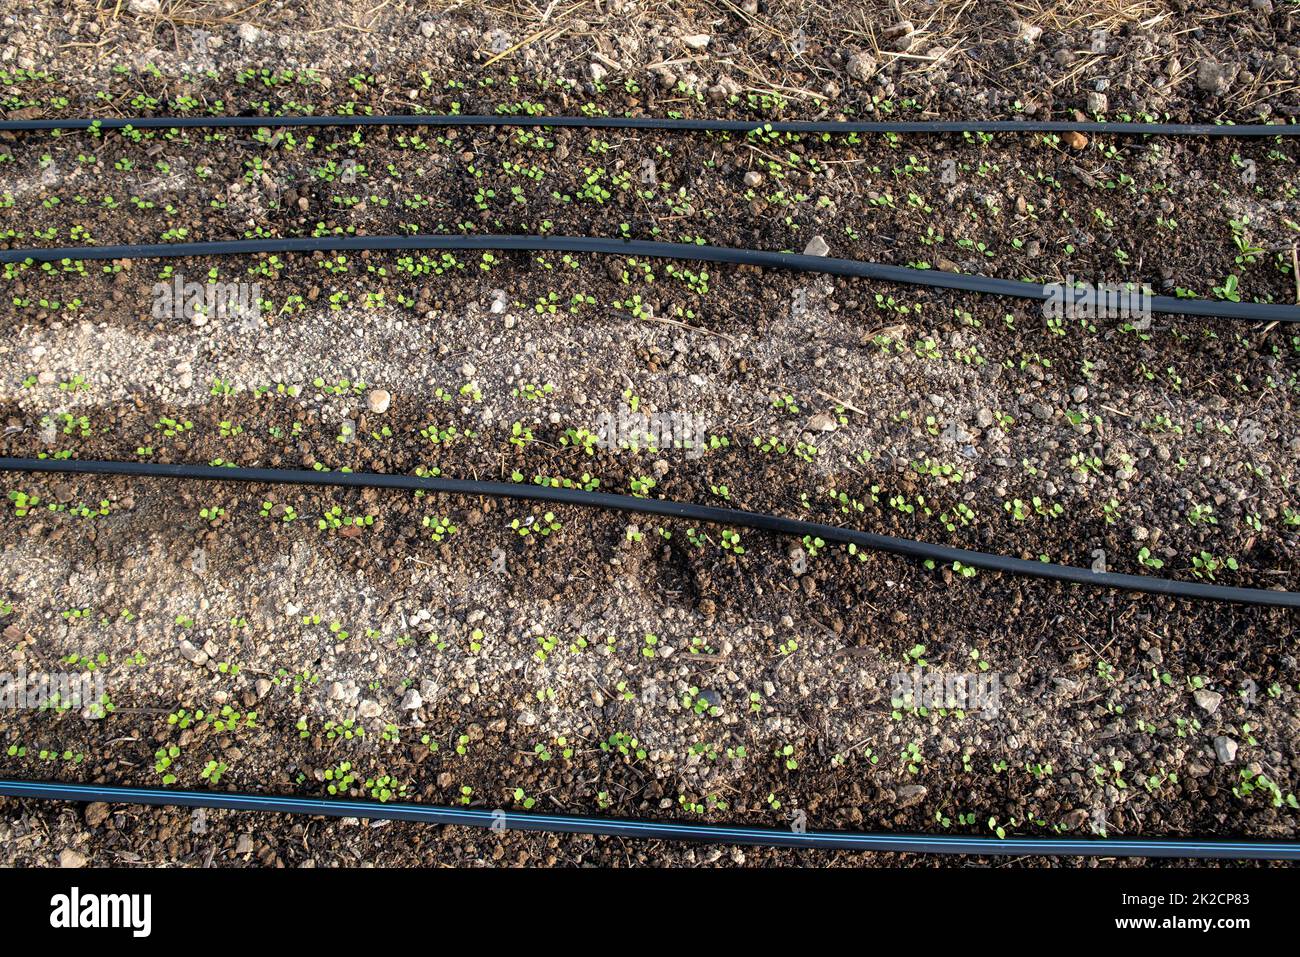 seedlings sprout around wet irrigation lines in garden soil Stock Photo